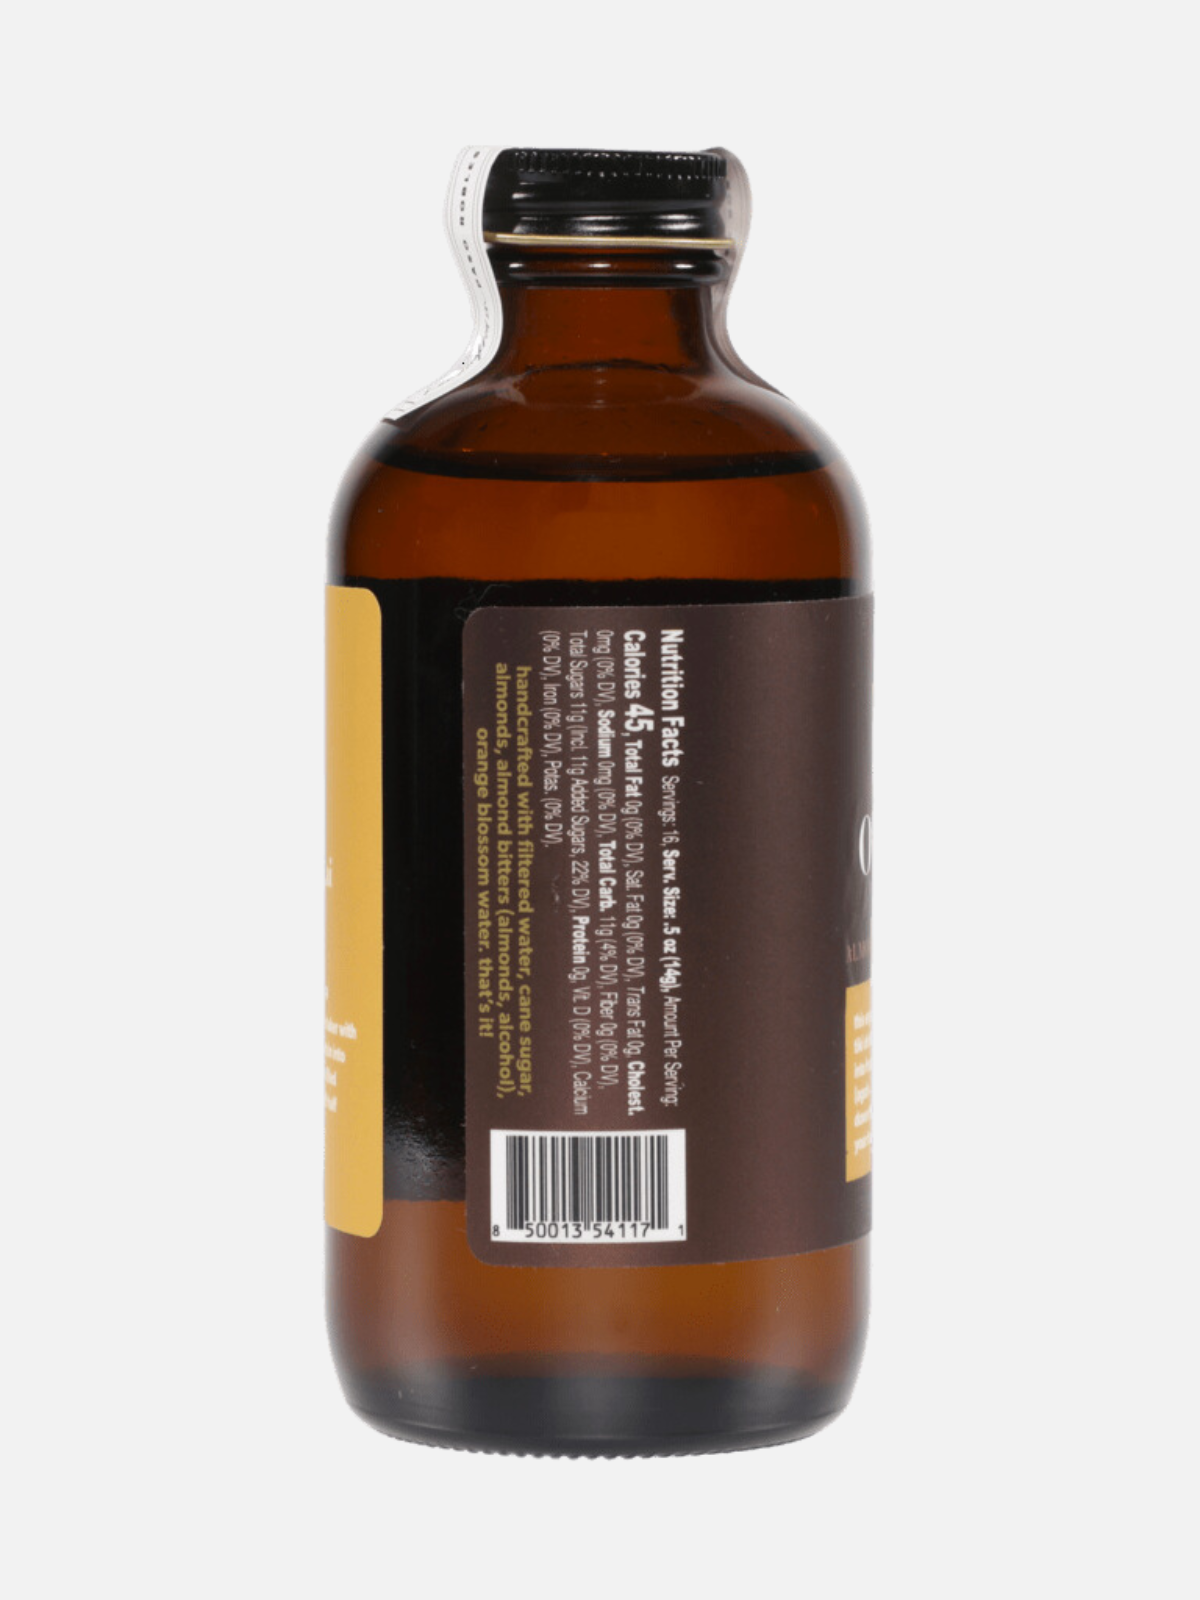 Yes Co. Orgeat Cocktail Syrup